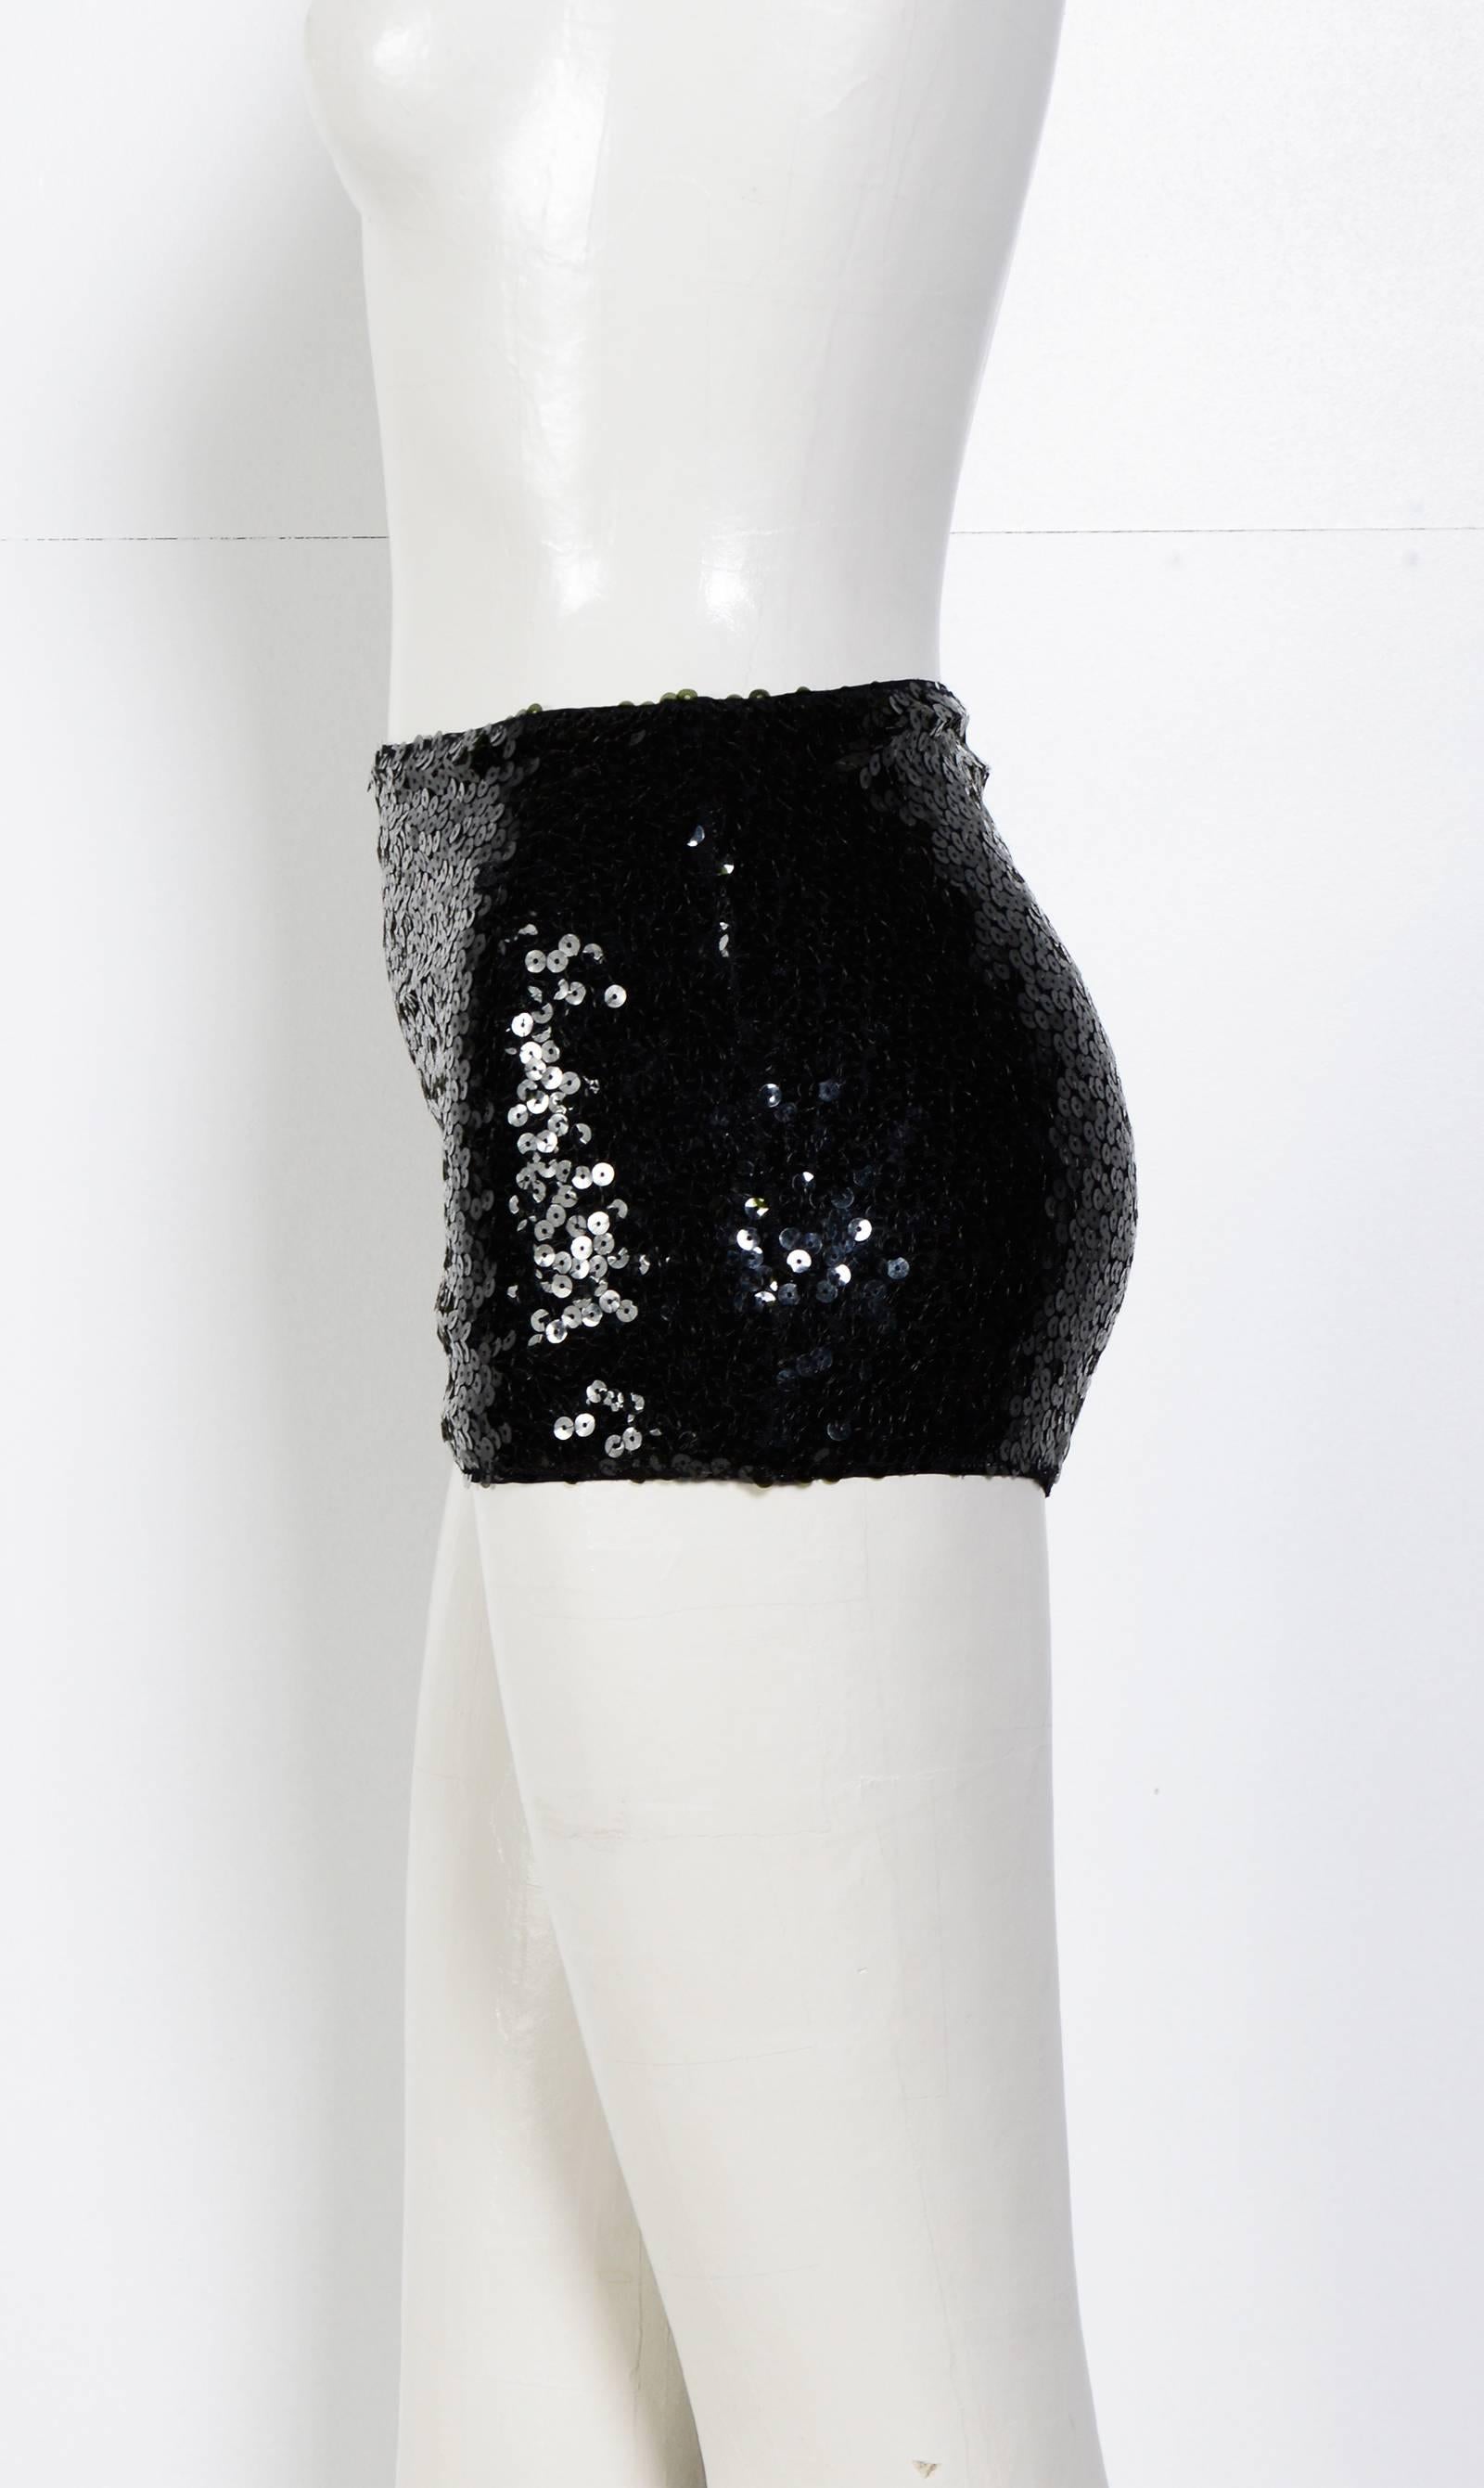 Chanel Spring 2007 RTW Sequined Black Shorts 
Spring - Summer 2007 runway. 
French Size 38
Waist taken flat in inches 13